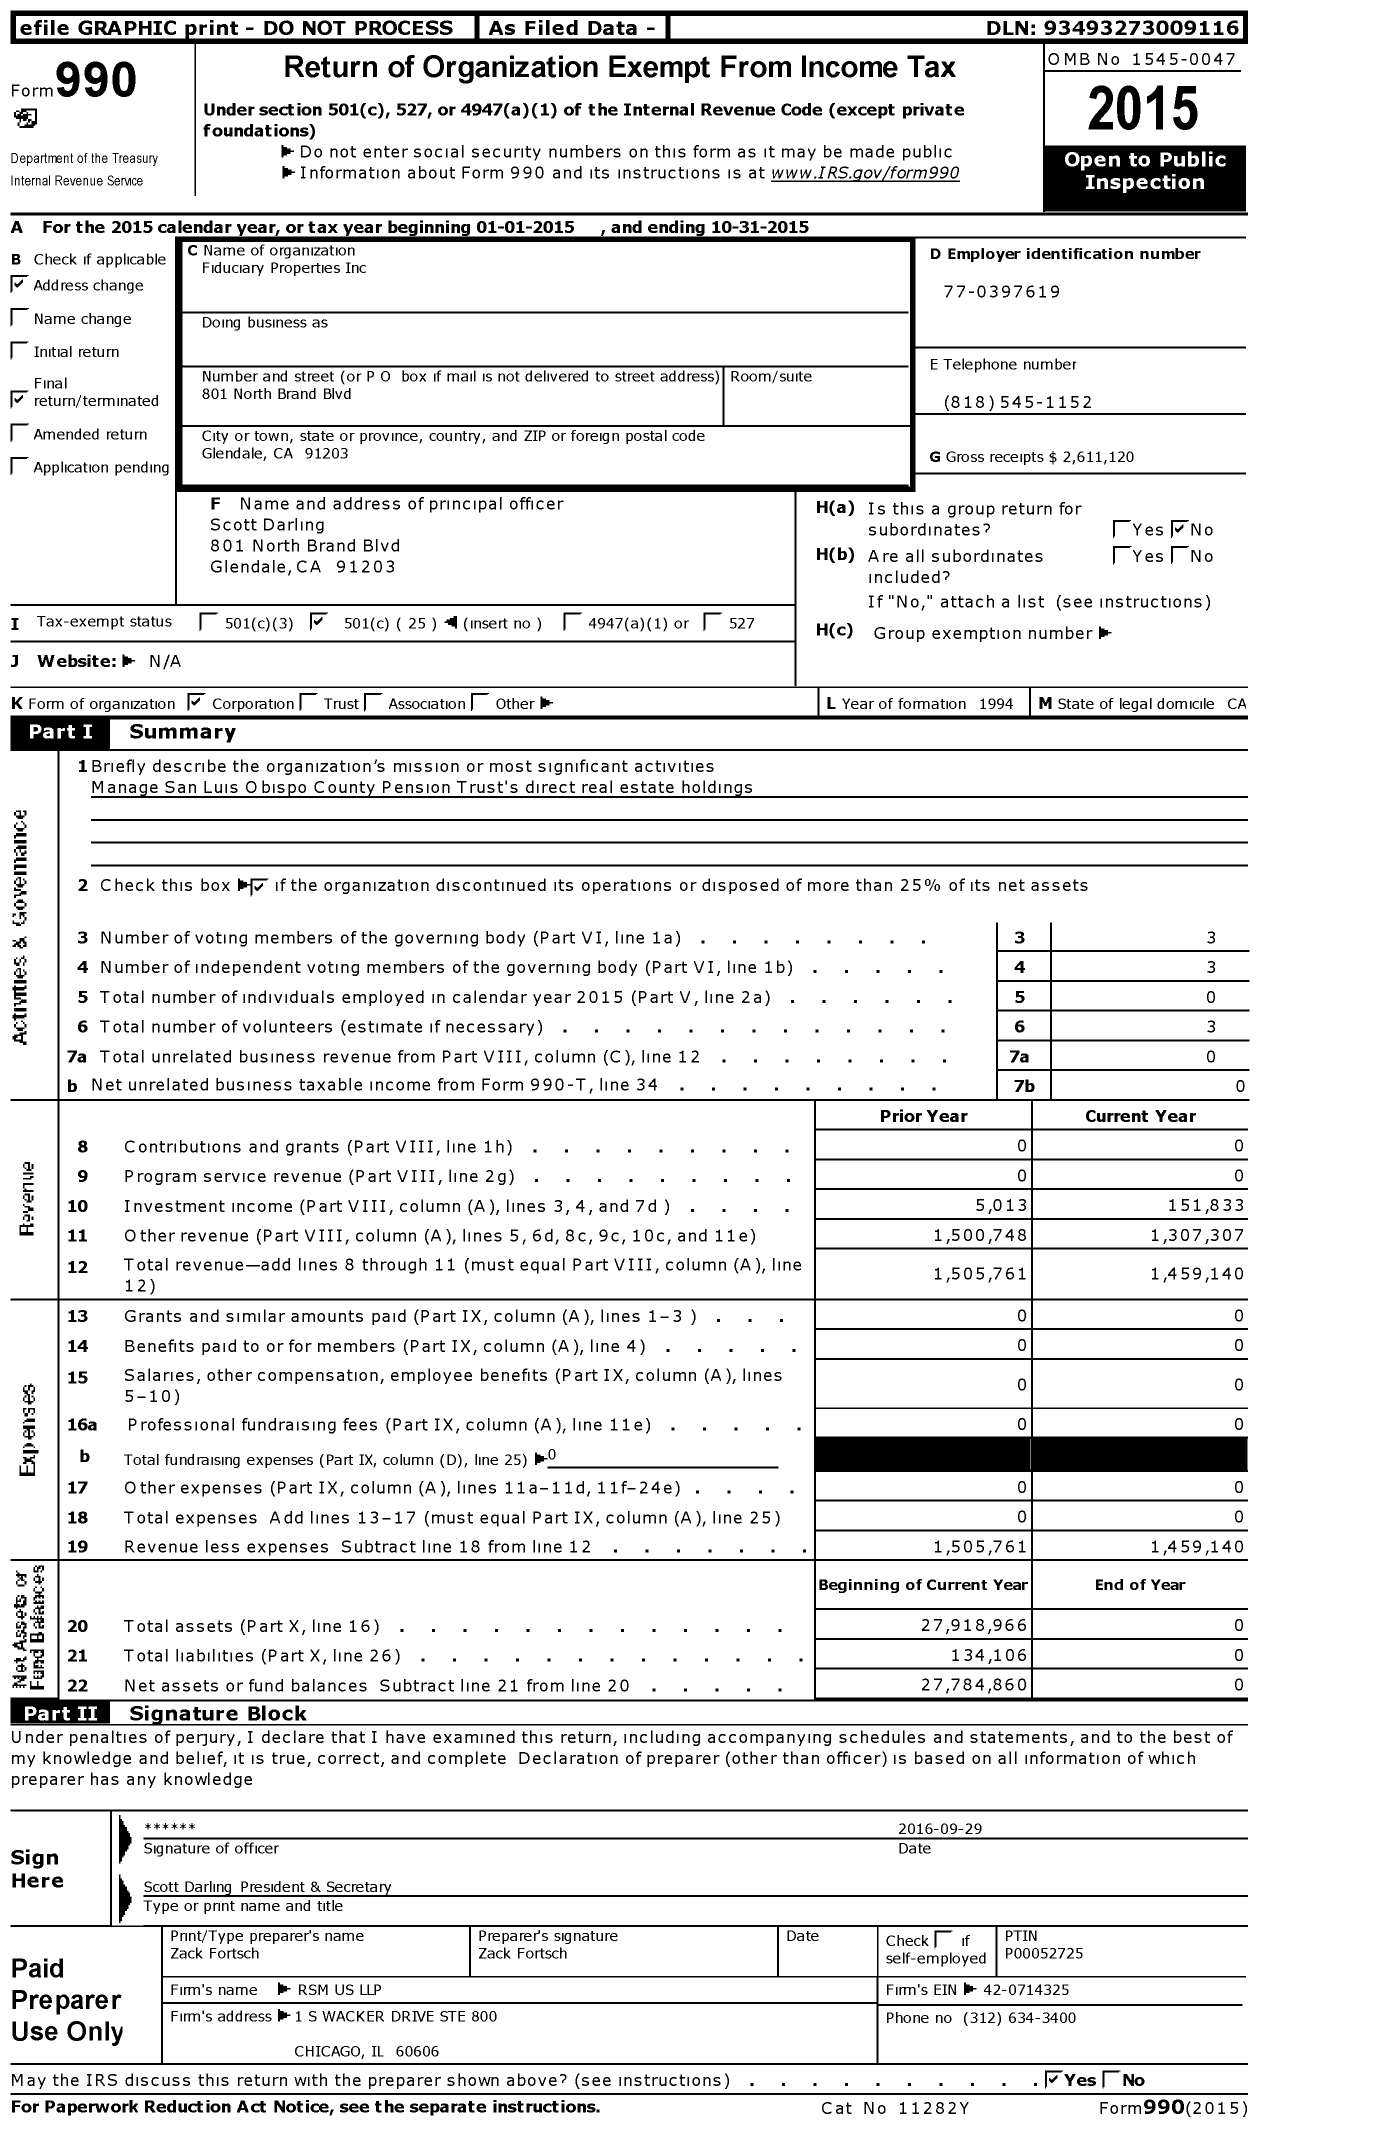 Image of first page of 2014 Form 990O for Fiduciary Properties